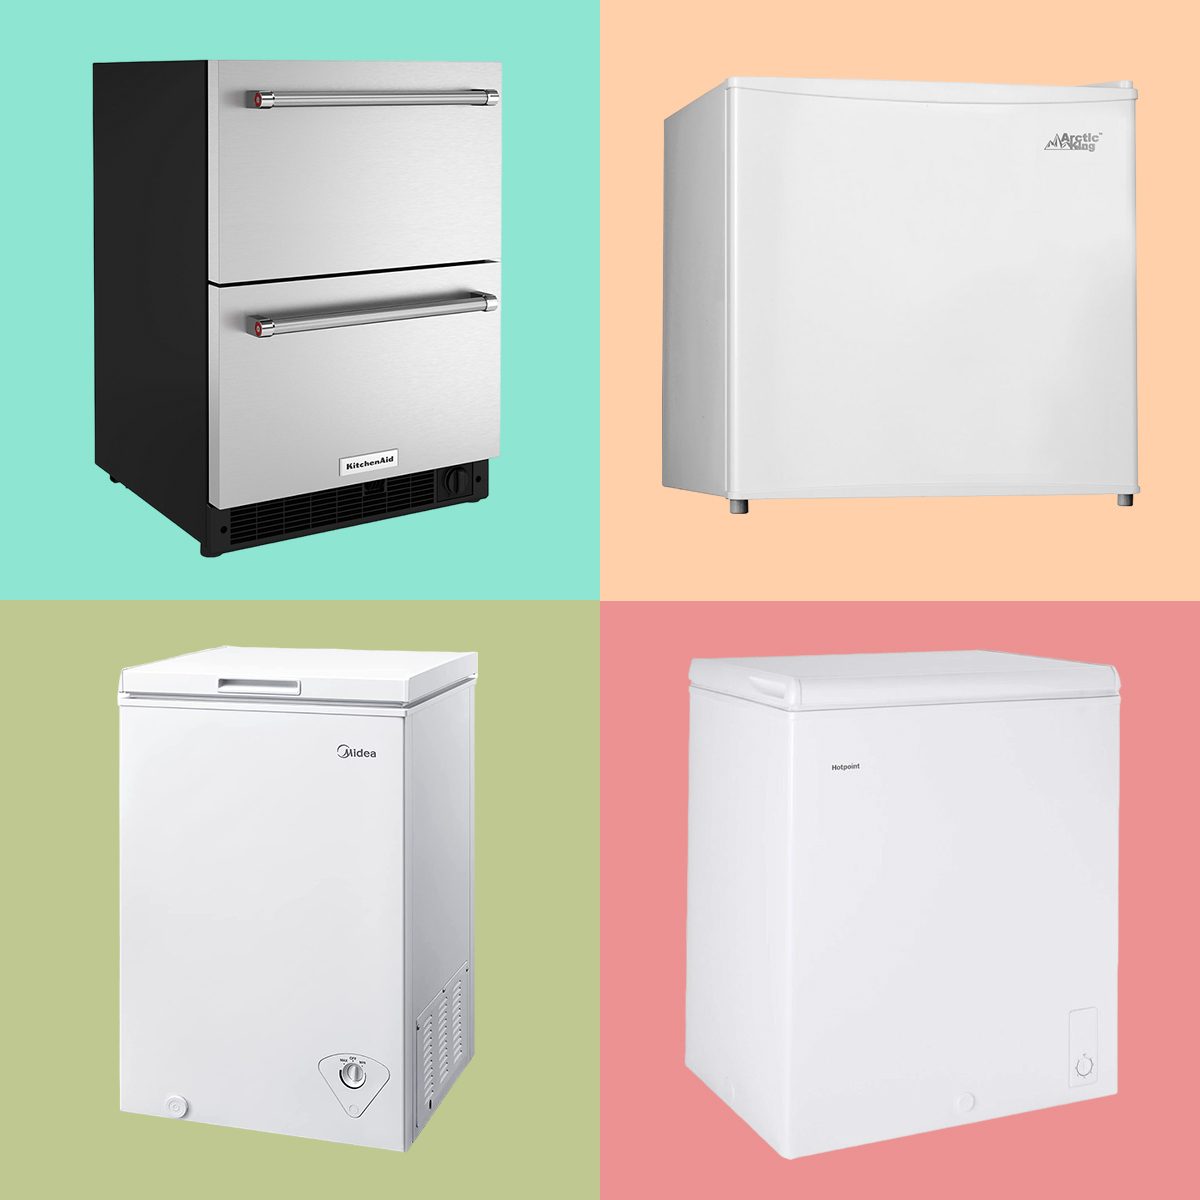 Best deep freezers for both personal and business needs